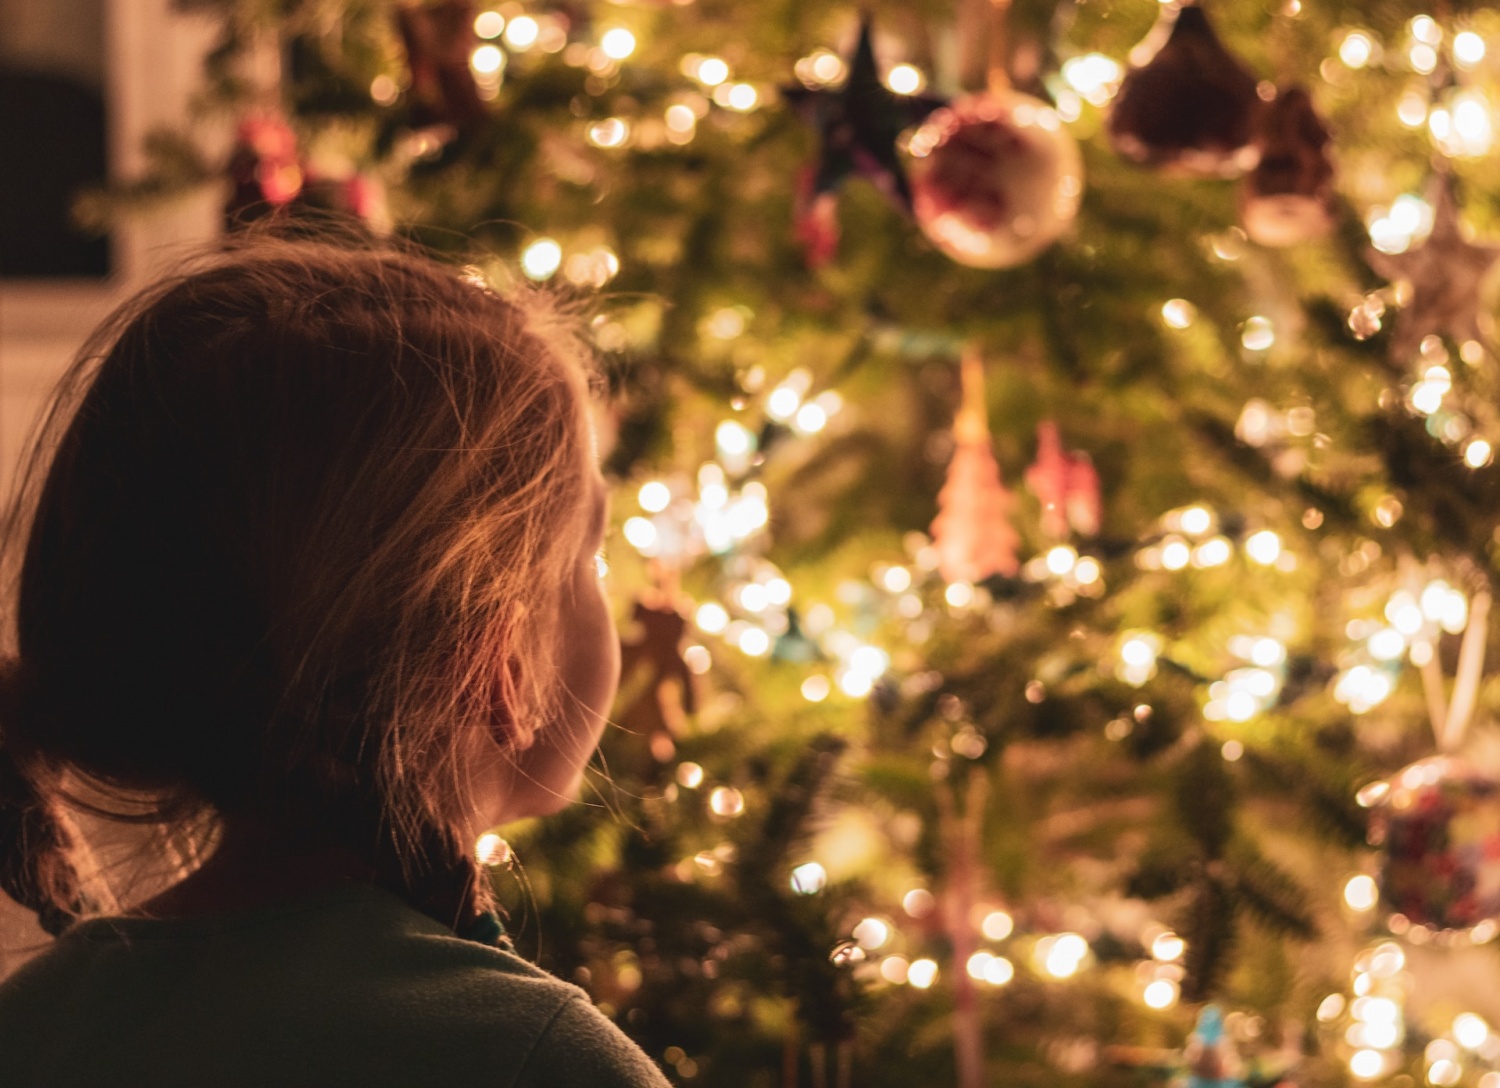 How Nostalgia Could Help Boost Your Mental Health Over the Holidays